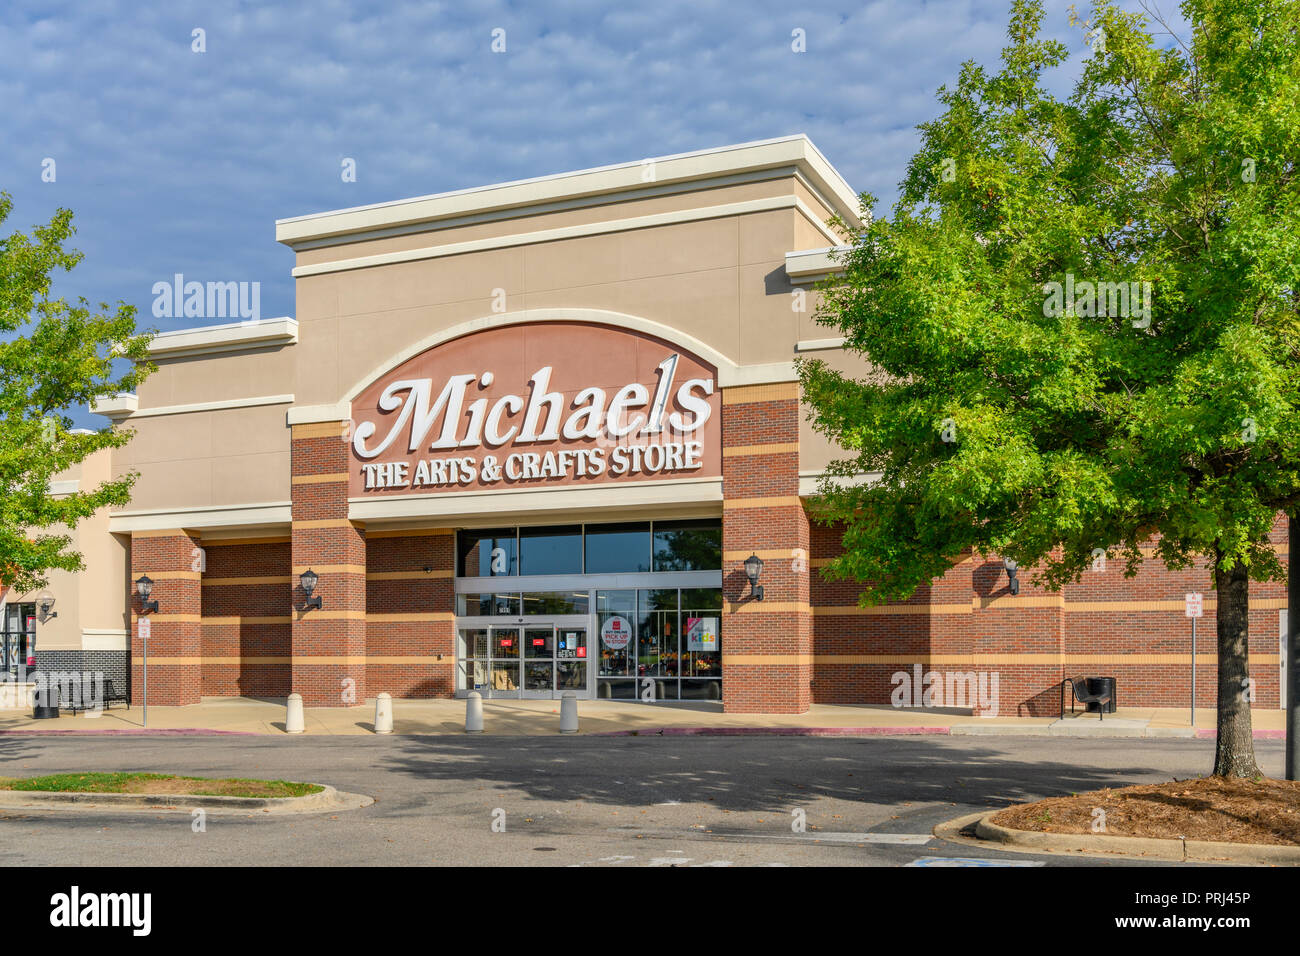 https://c8.alamy.com/comp/PRJ45P/front-exterior-entrance-of-michaels-arts-and-crafts-retail-big-box-store-showing-the-sign-and-logo-in-montgomery-alabama-usa-PRJ45P.jpg